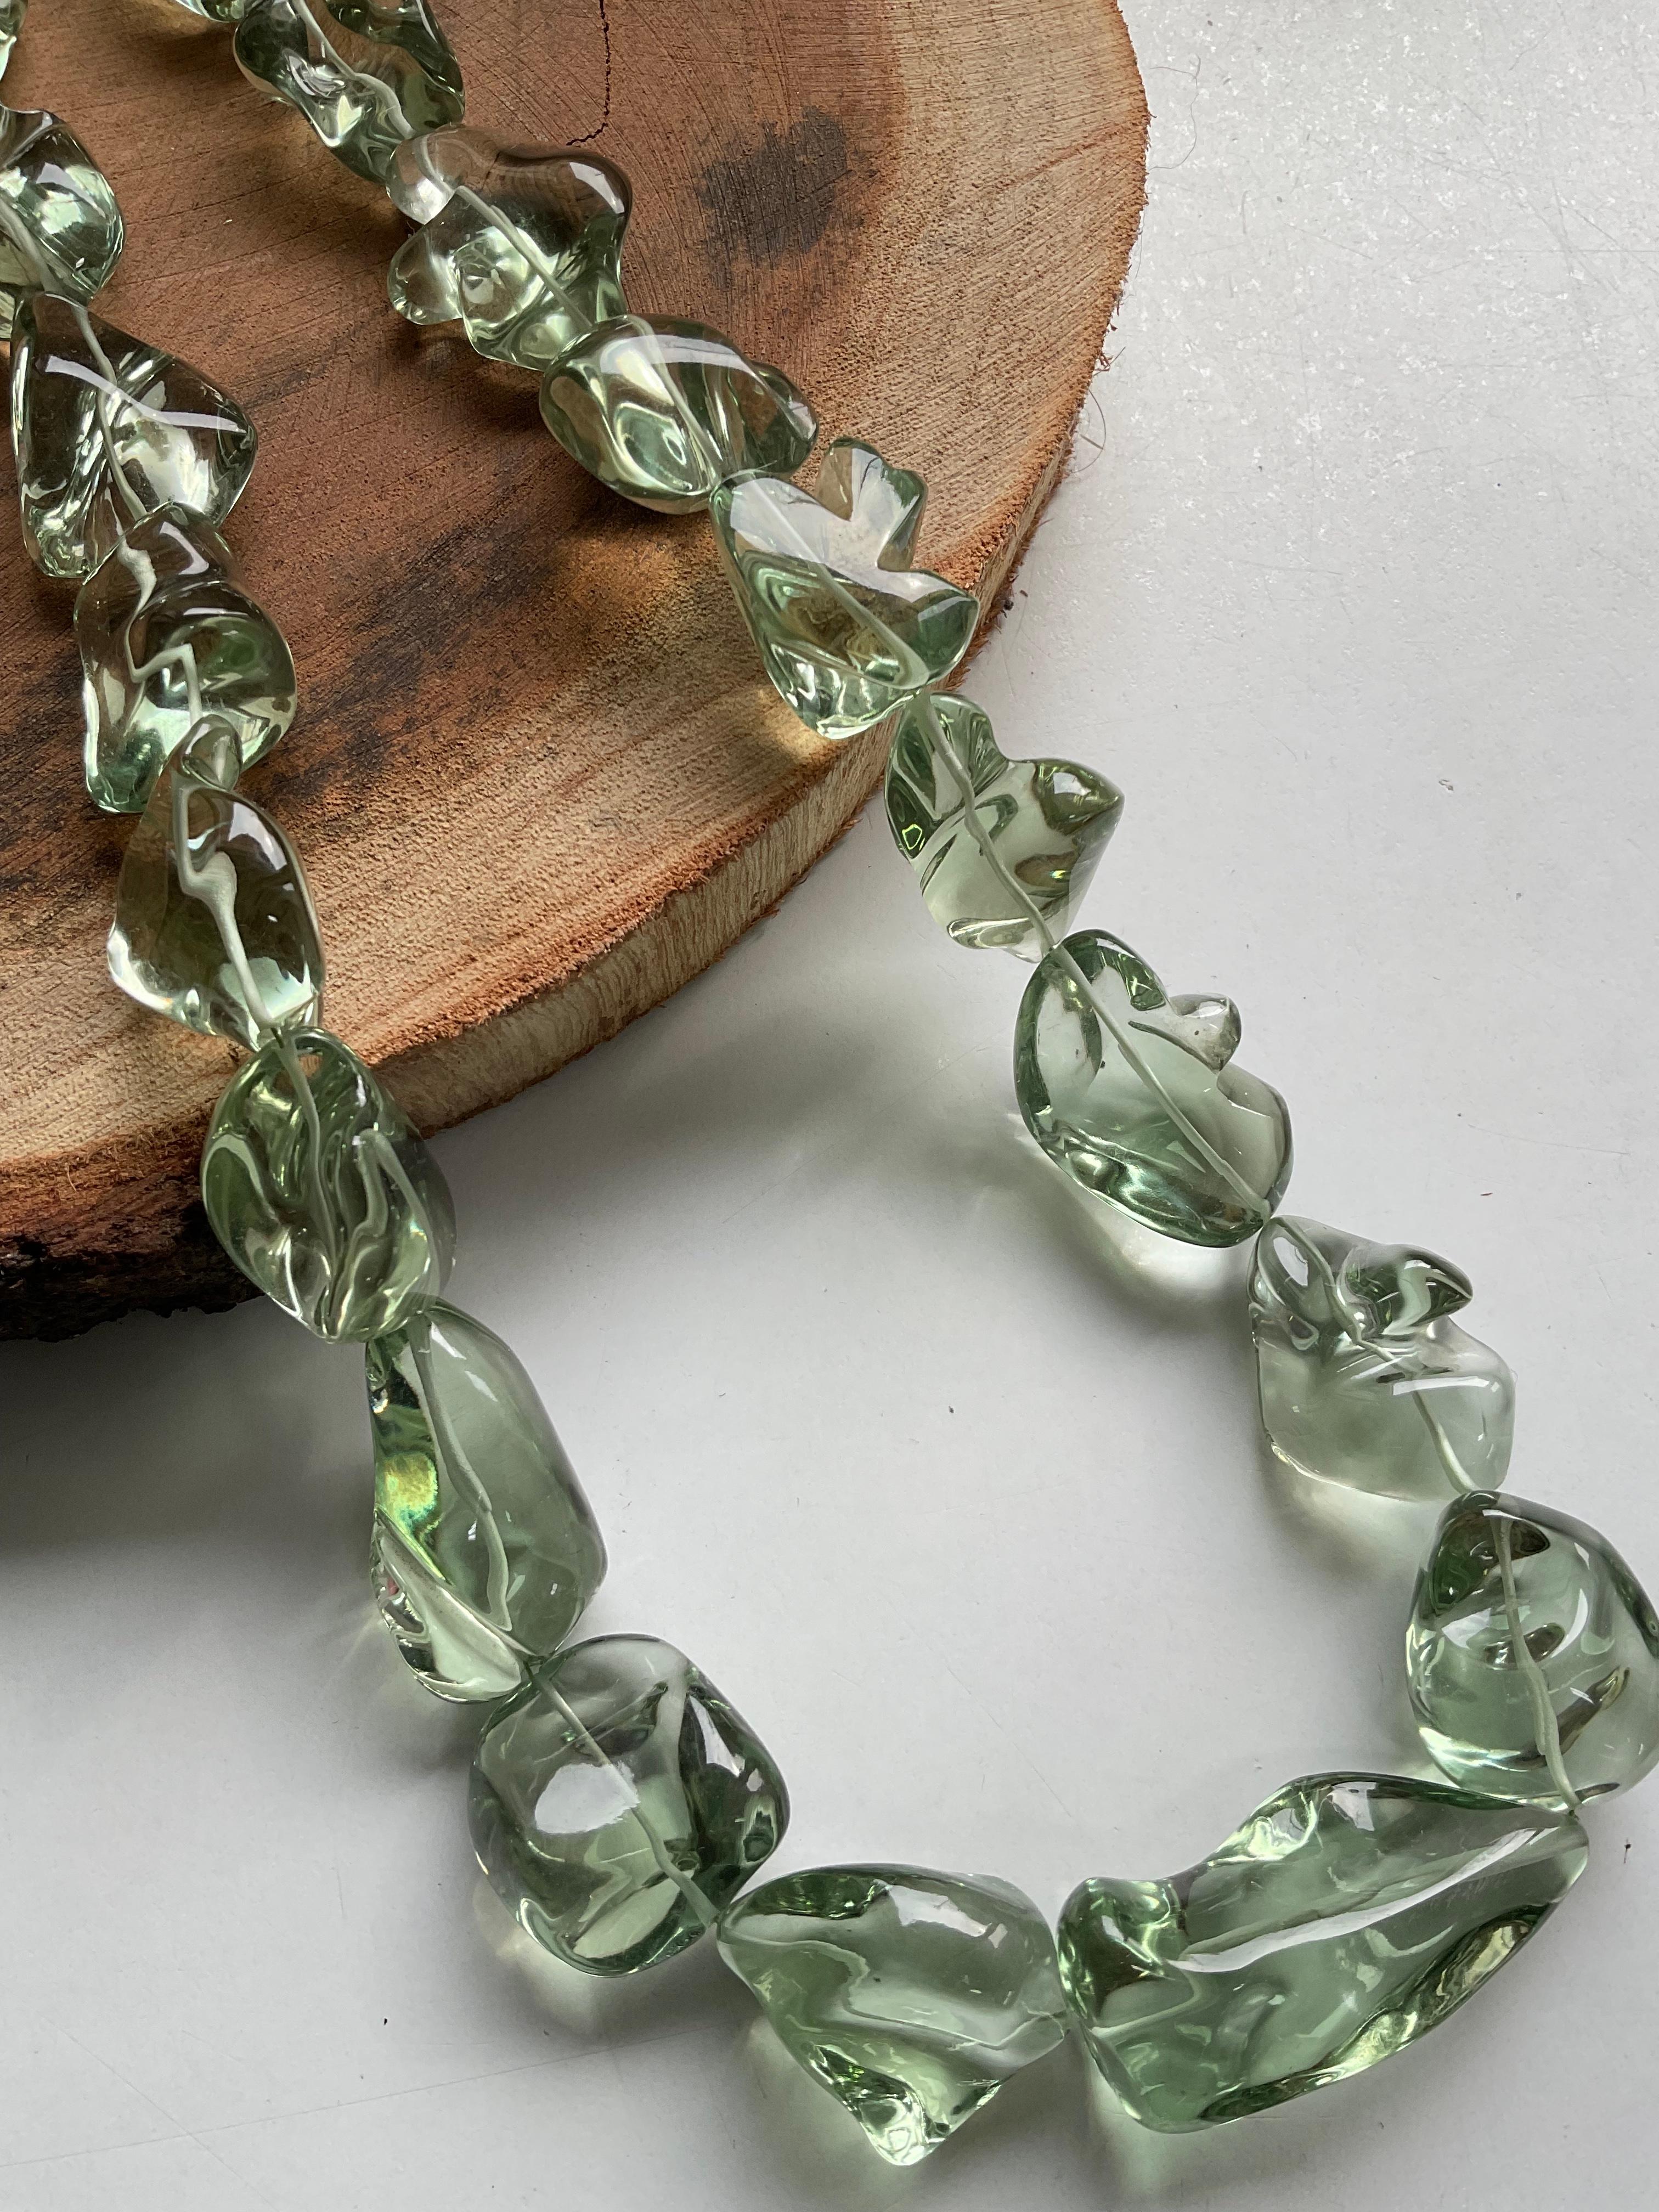 Prasiolite Green Amethyst Quartz Beaded Jewelry Necklace Gem quality
Size : 12 X 23 To 21 X 40 MM 
Weight : 617 Carats
Length Of Necklace : 18 Inch 
Pieces : 19 Gems 